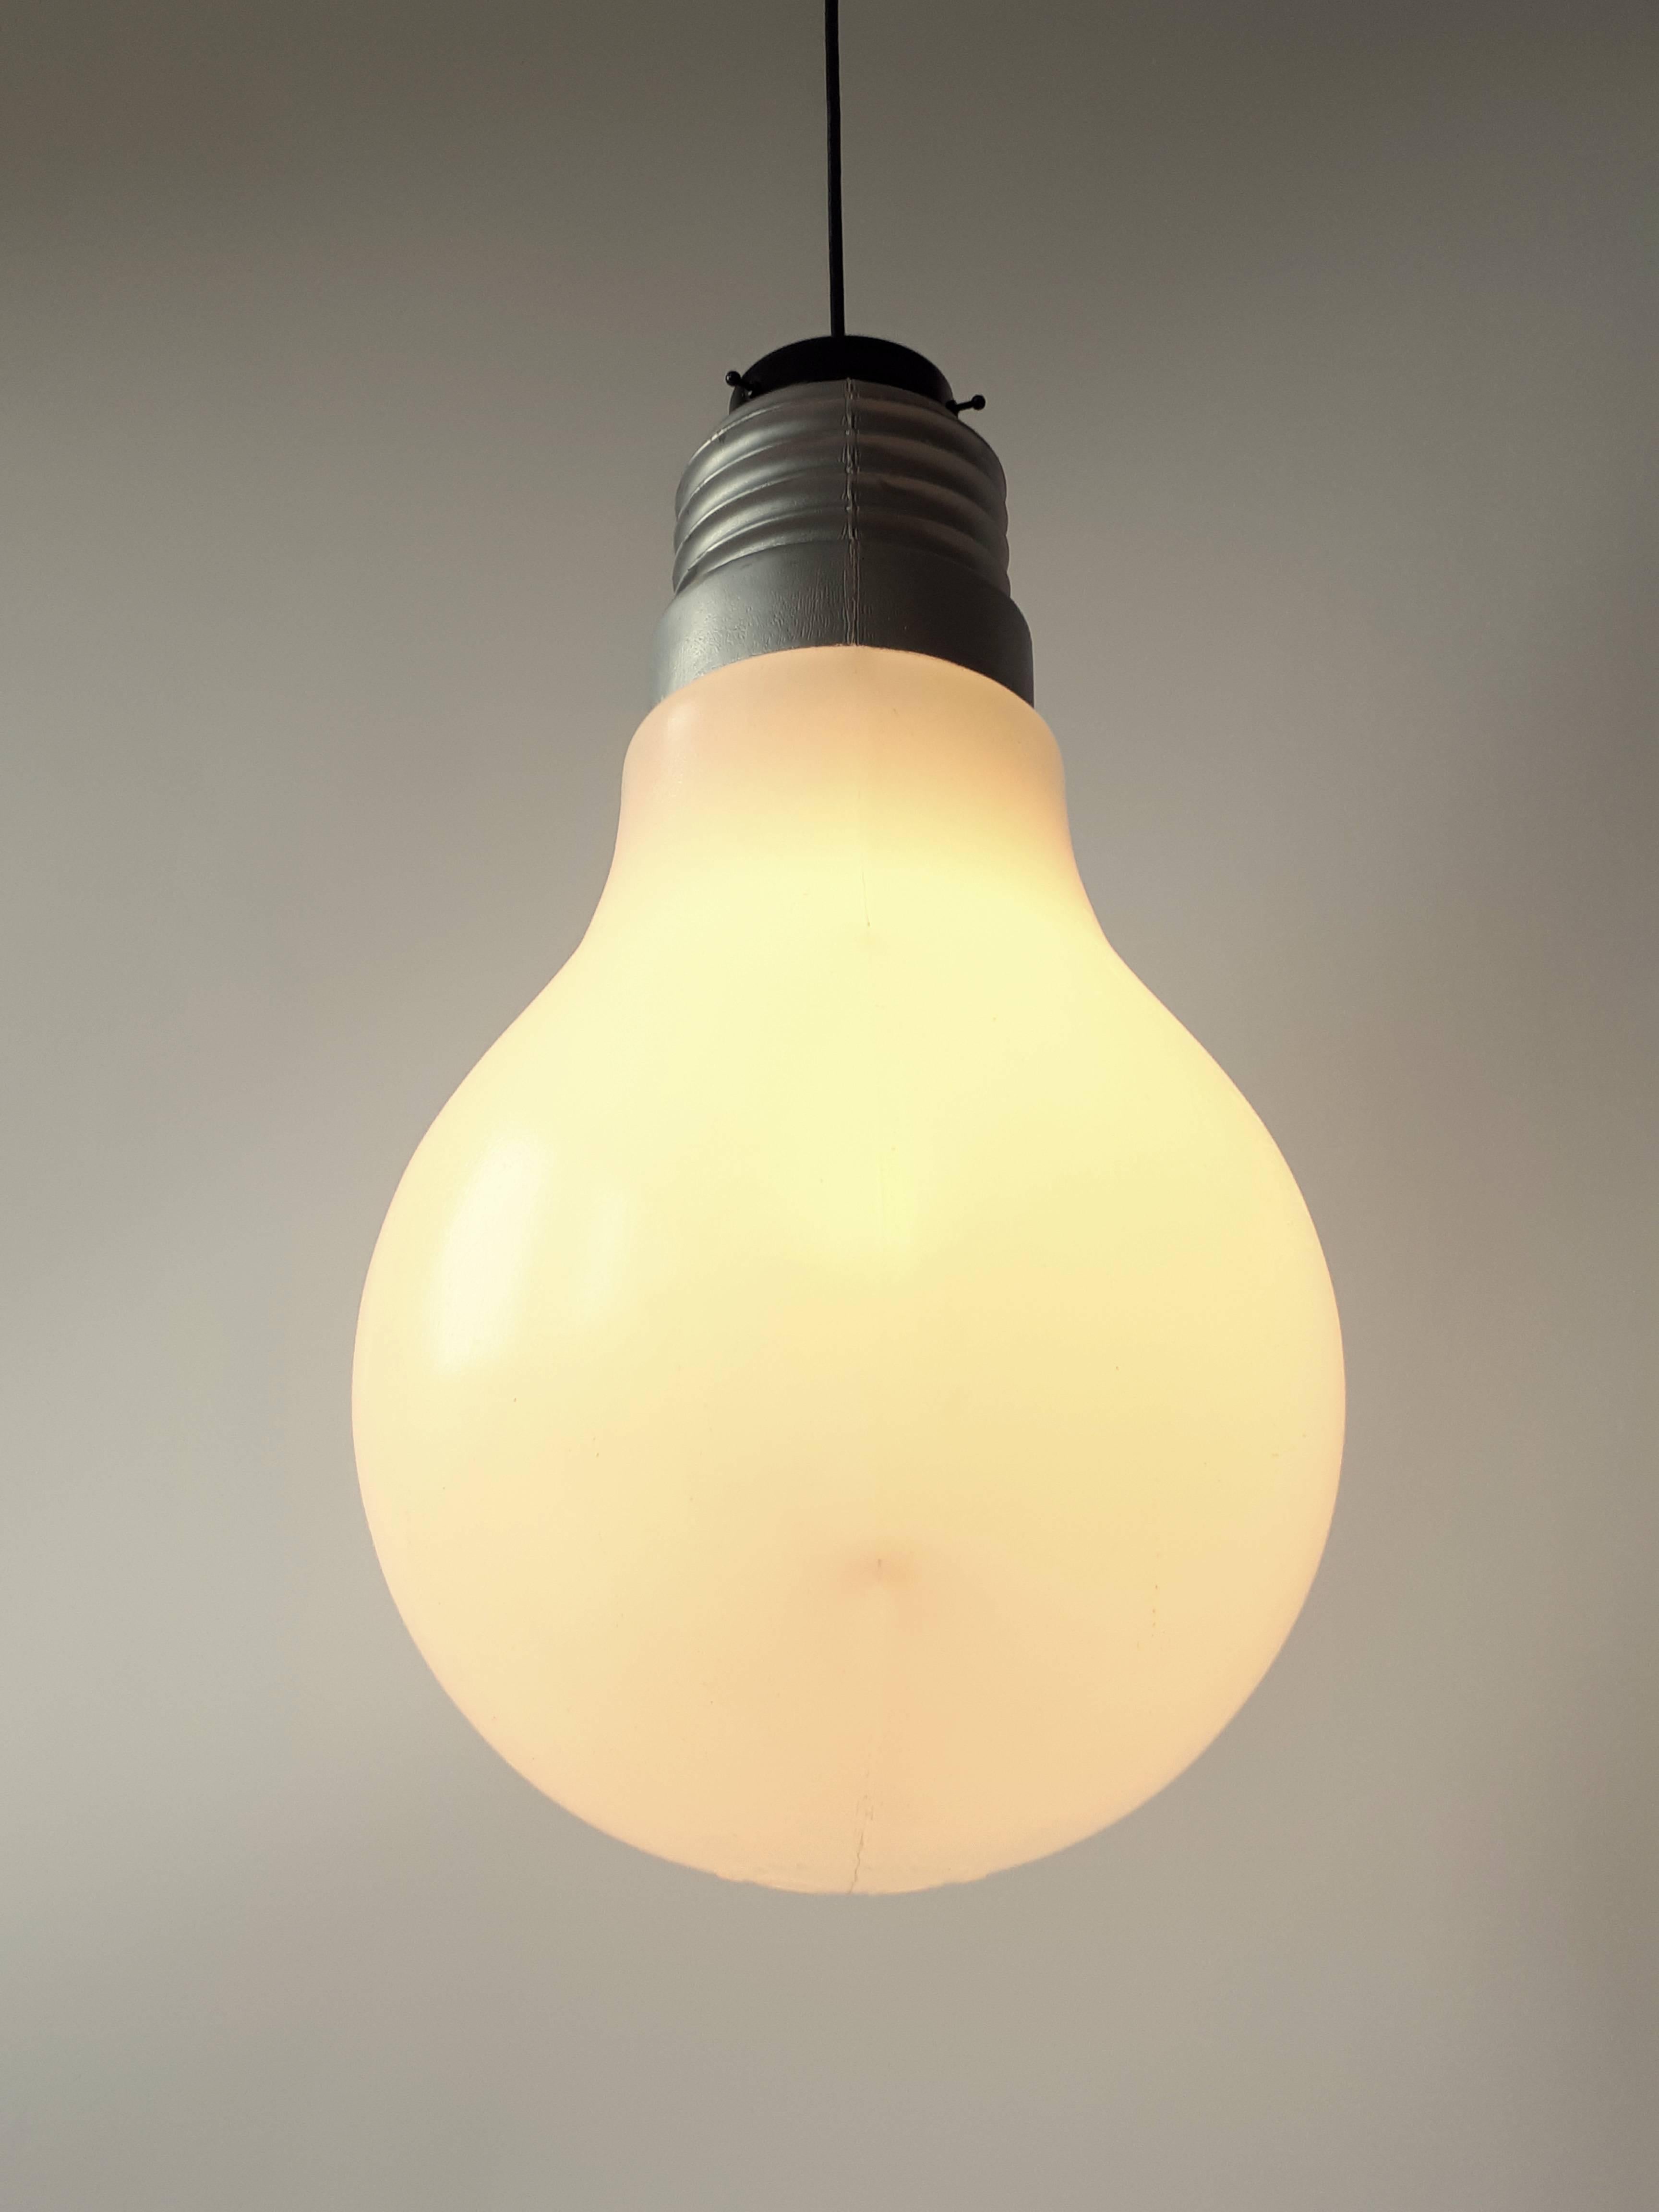 Iconic oversize 'Bulb Bulb' could be hang from the ceiling or lay loose on the floor. 

Contain one regular E26 size socket rated at 60 watts. 

Come with 12 feet long new black cord with wall plug.

Marked item. 

   